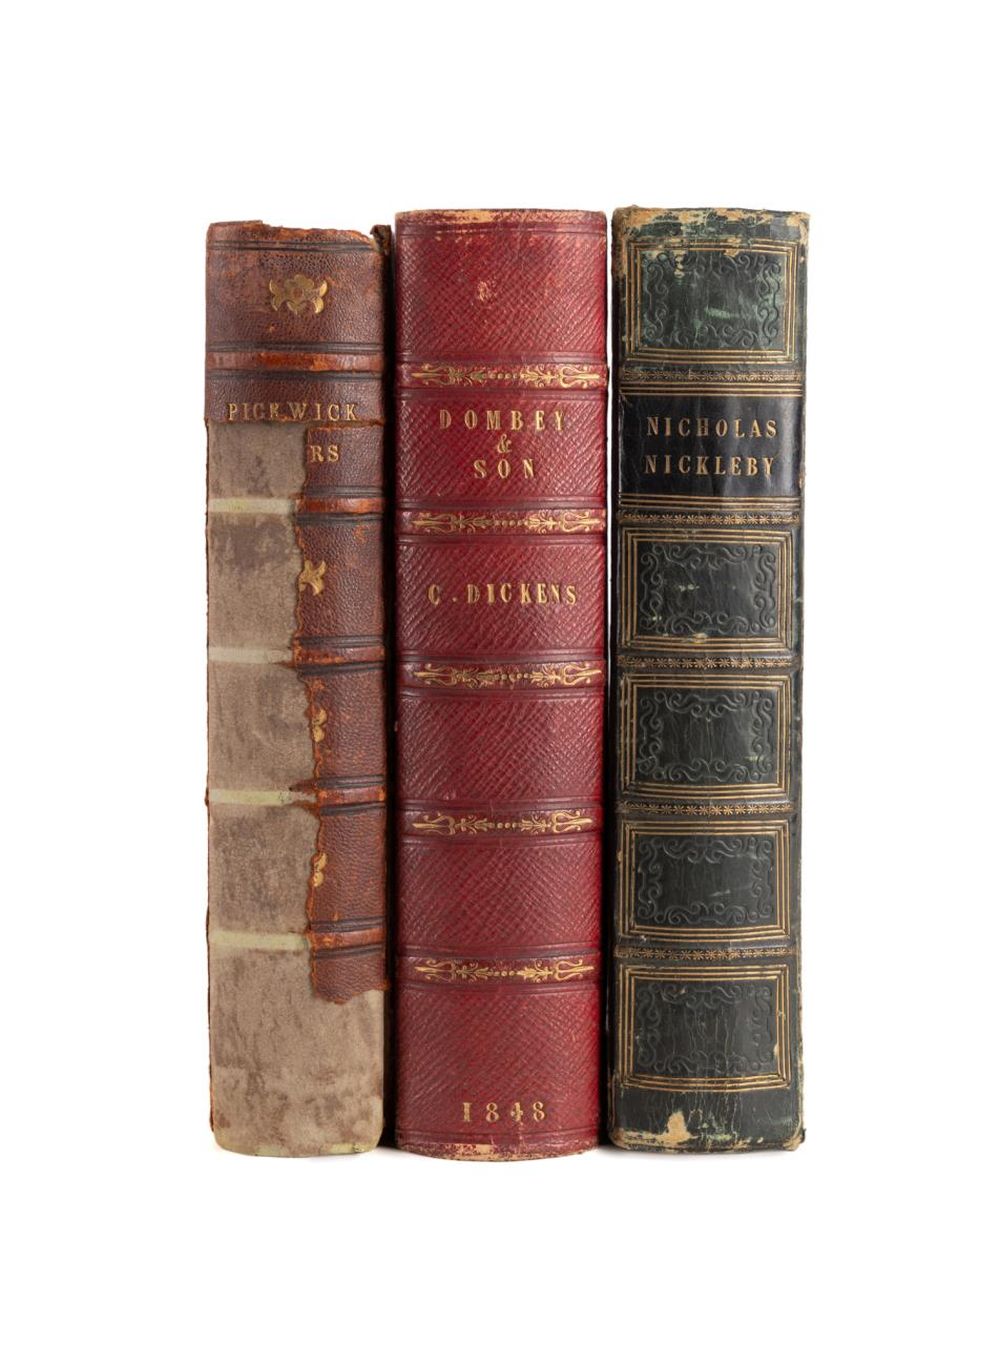 3VOL CHARLES DICKENS FIRST EDITIONS 3cd4c2